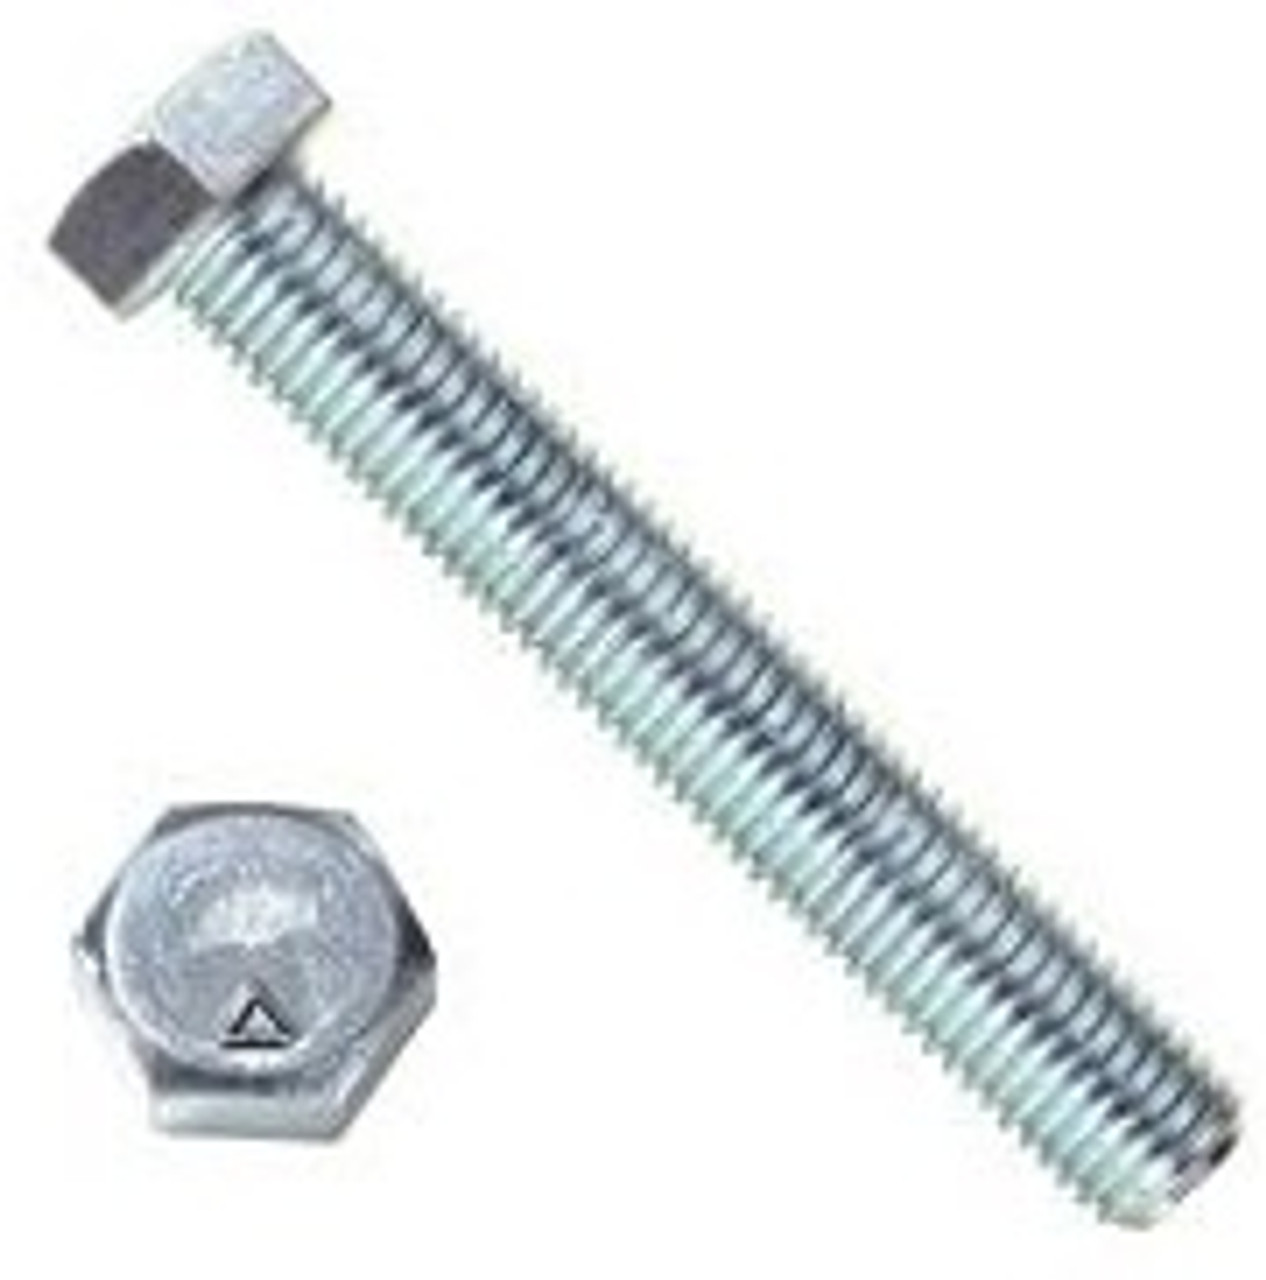 Picture of 3/8"-16 X 5" Hex Tap Bolts for EZ-GENPAD Kohler 14/20 RCA Generator Pad